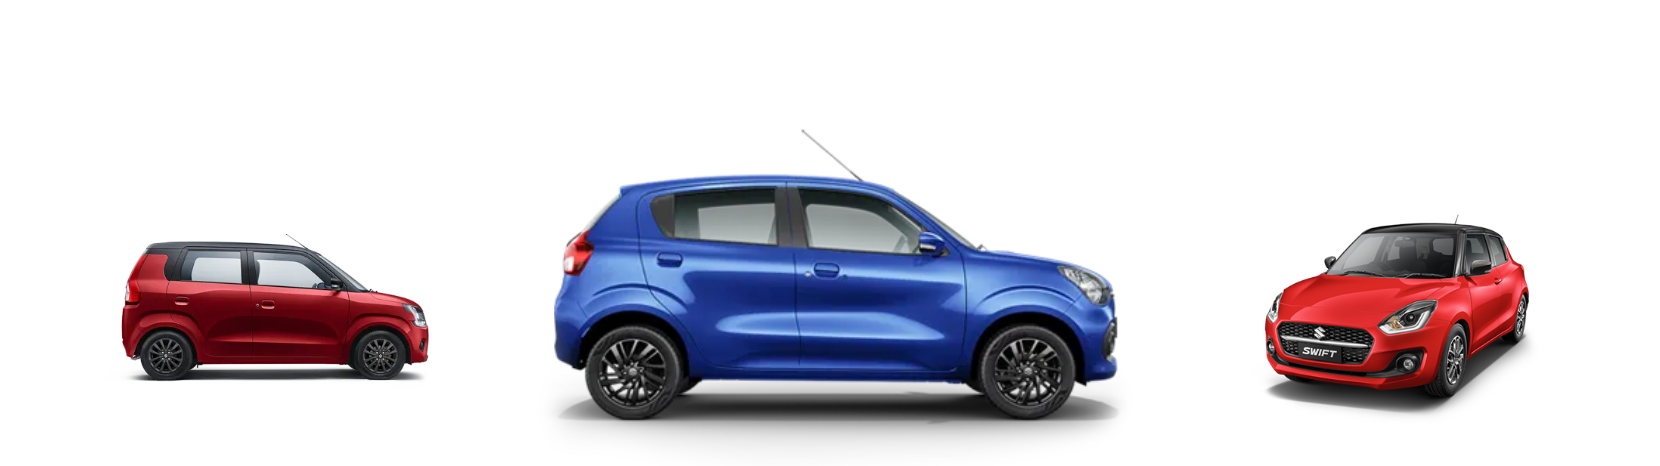 Maruti Suzuki Announces Substantial Discounts on Selected Models in April